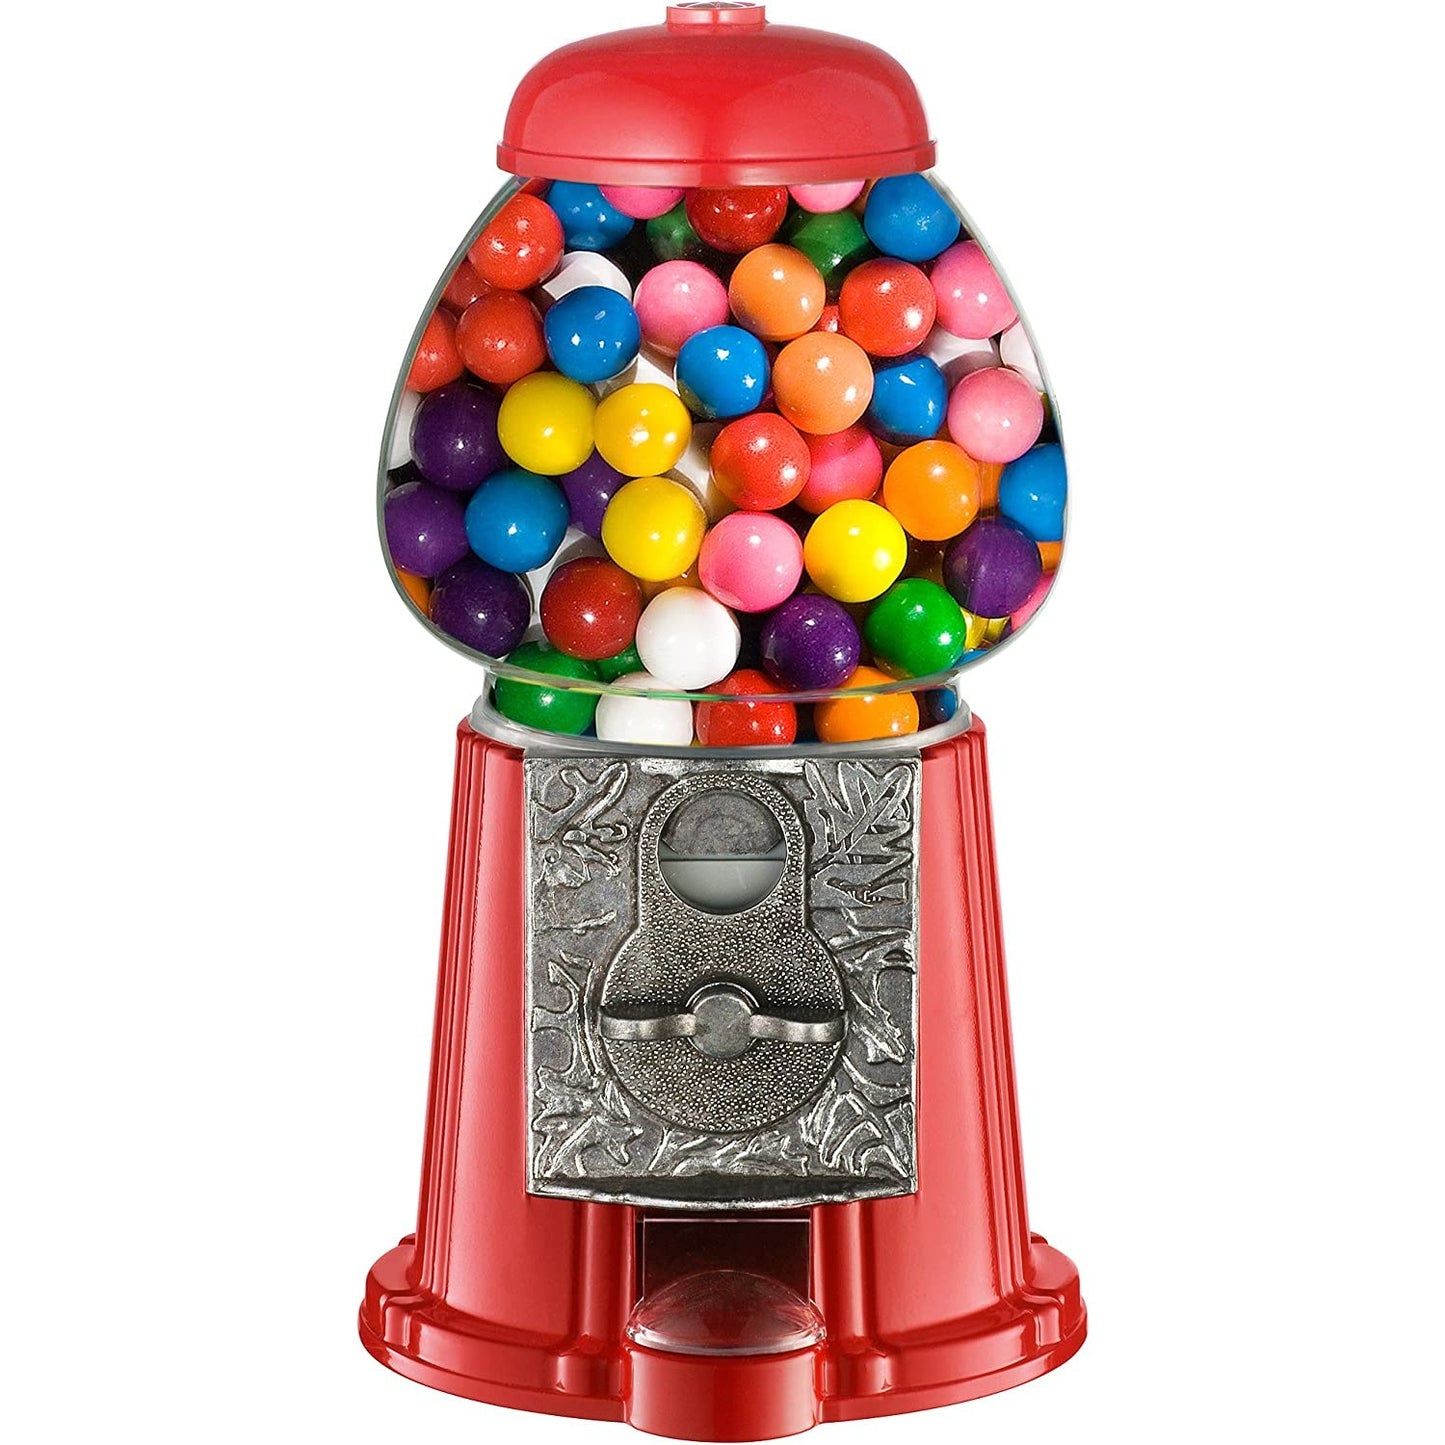 A retro style coin operated gumball dispenser filled with colorful gumballs